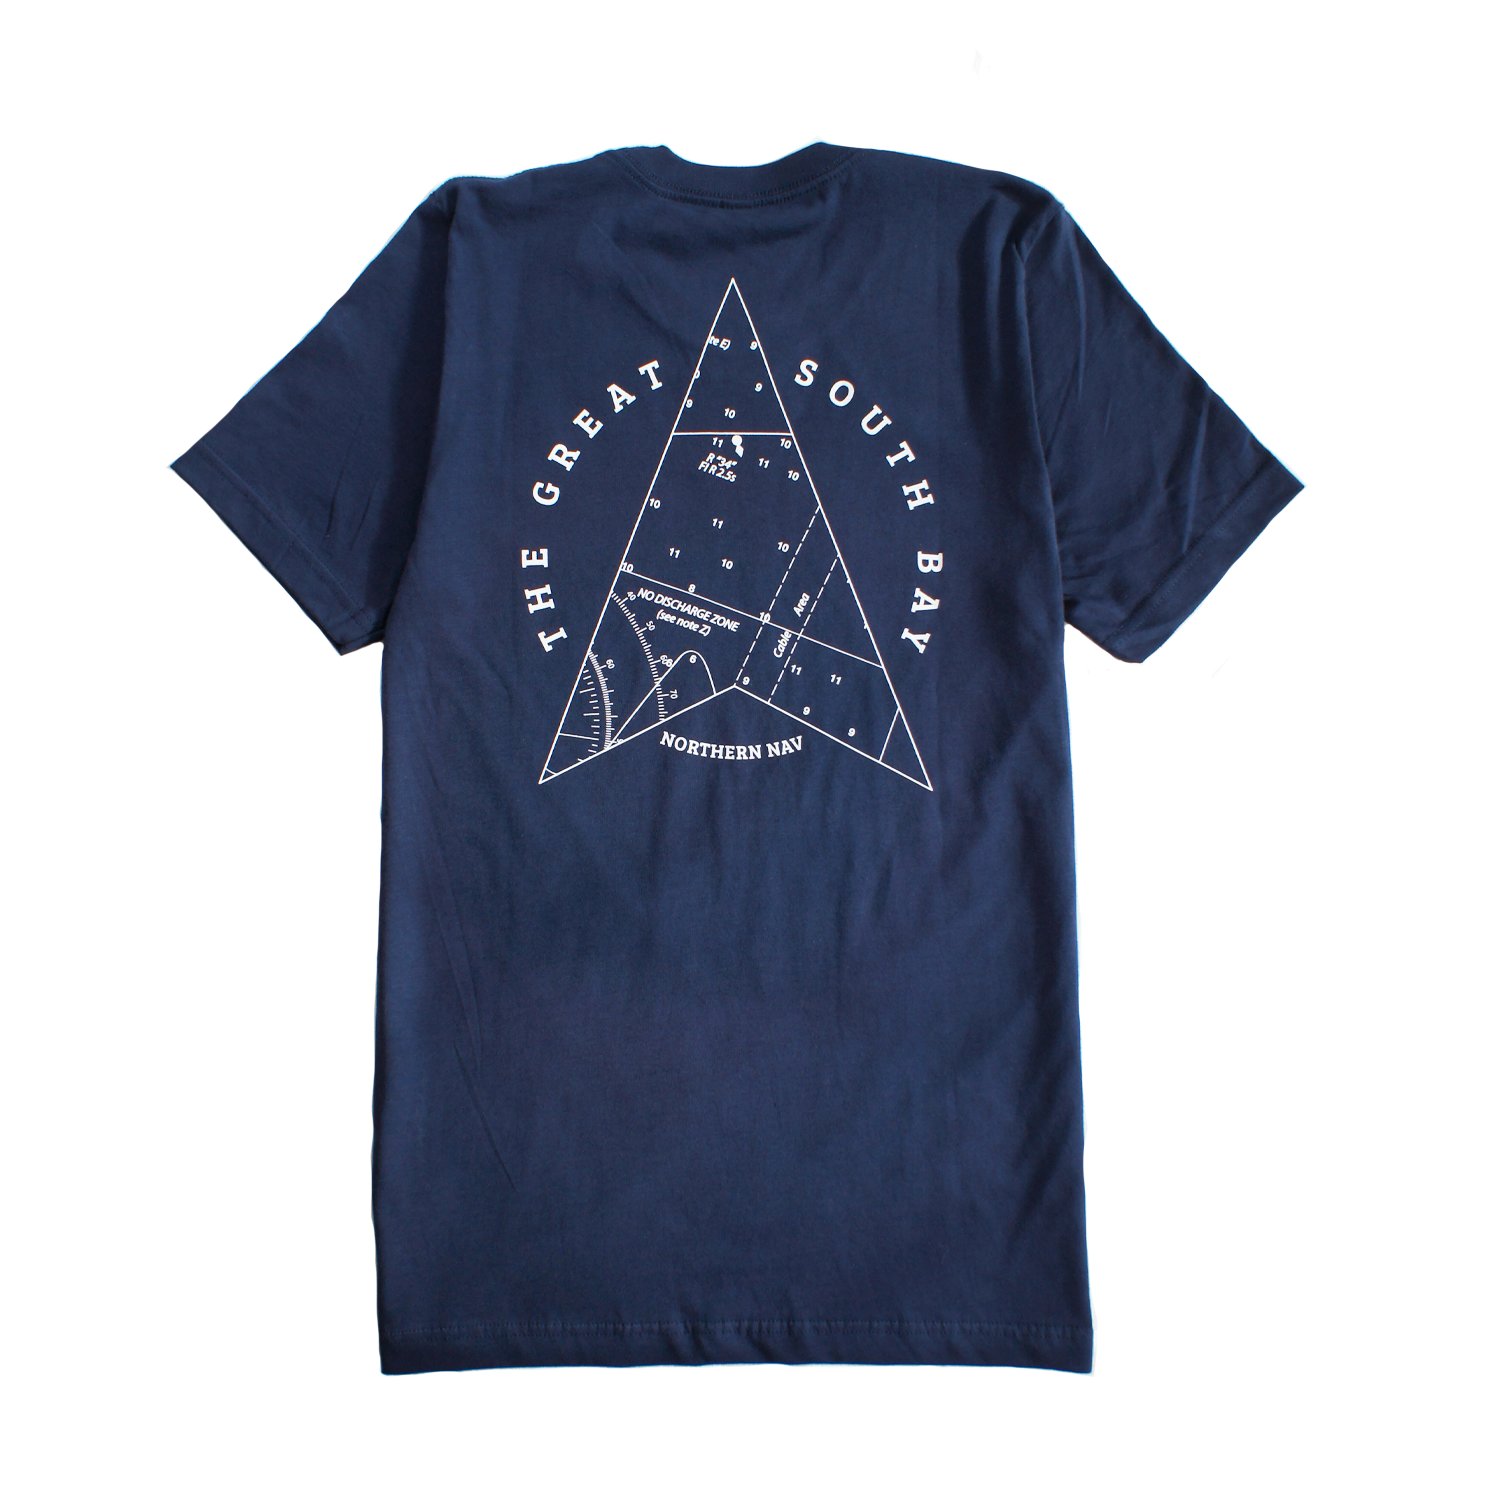 One of the nautical T-shirts from Northern Nav available for purchase at Nalu Dry Goods.